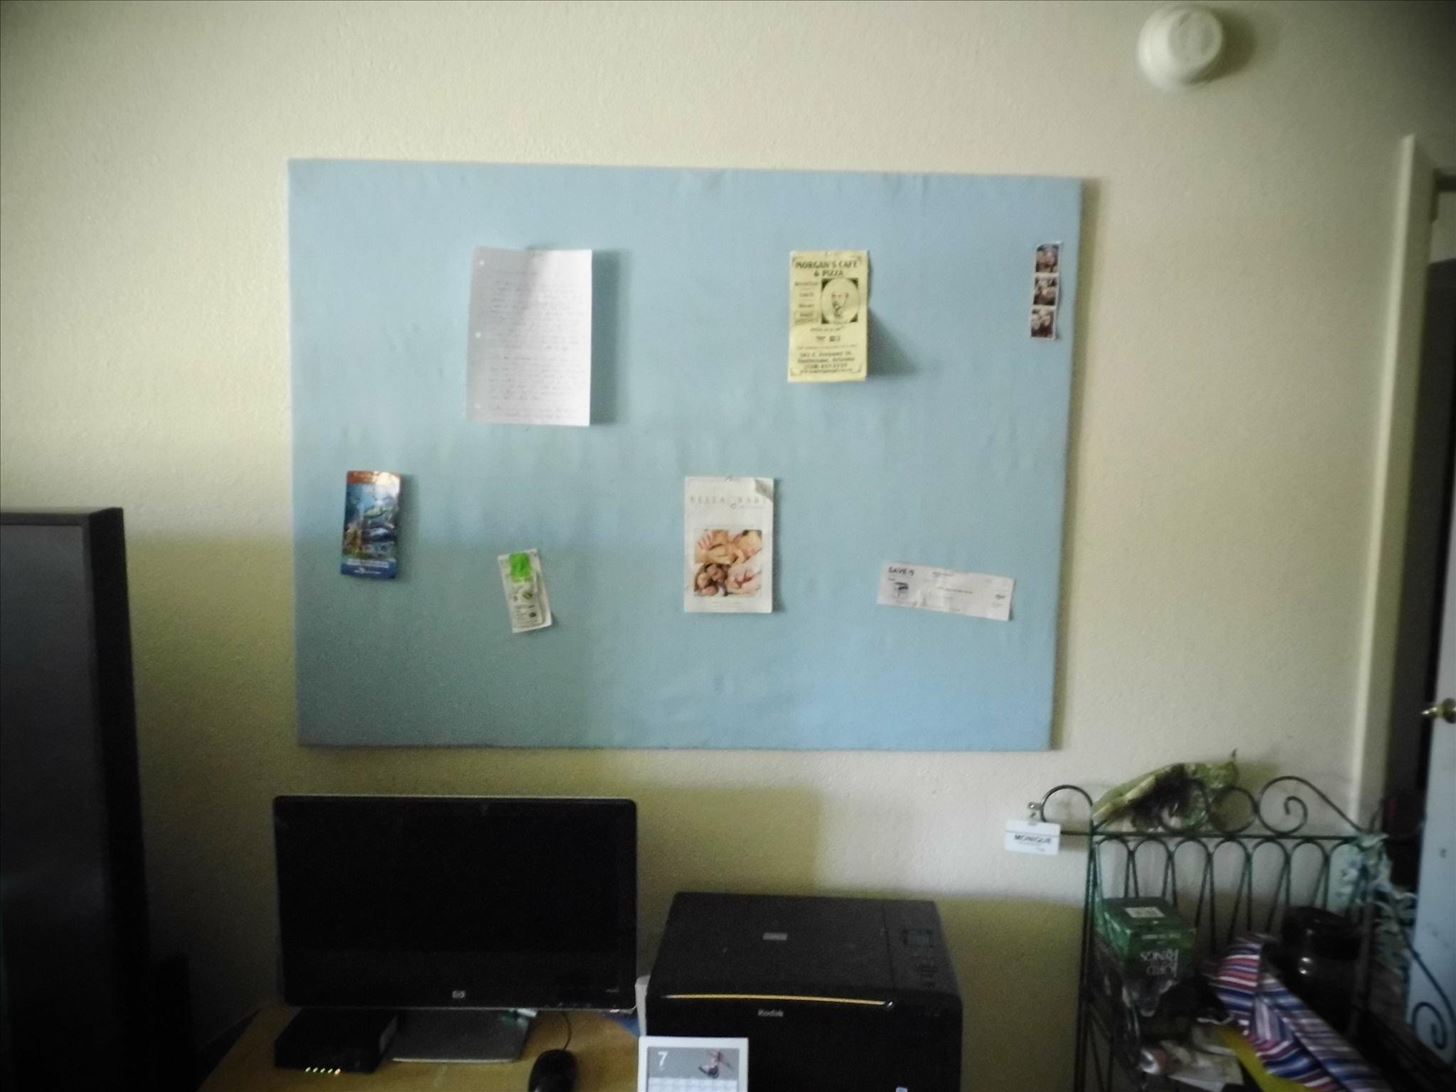 How to Make a Personalized Home Bulletin Board for Cheap